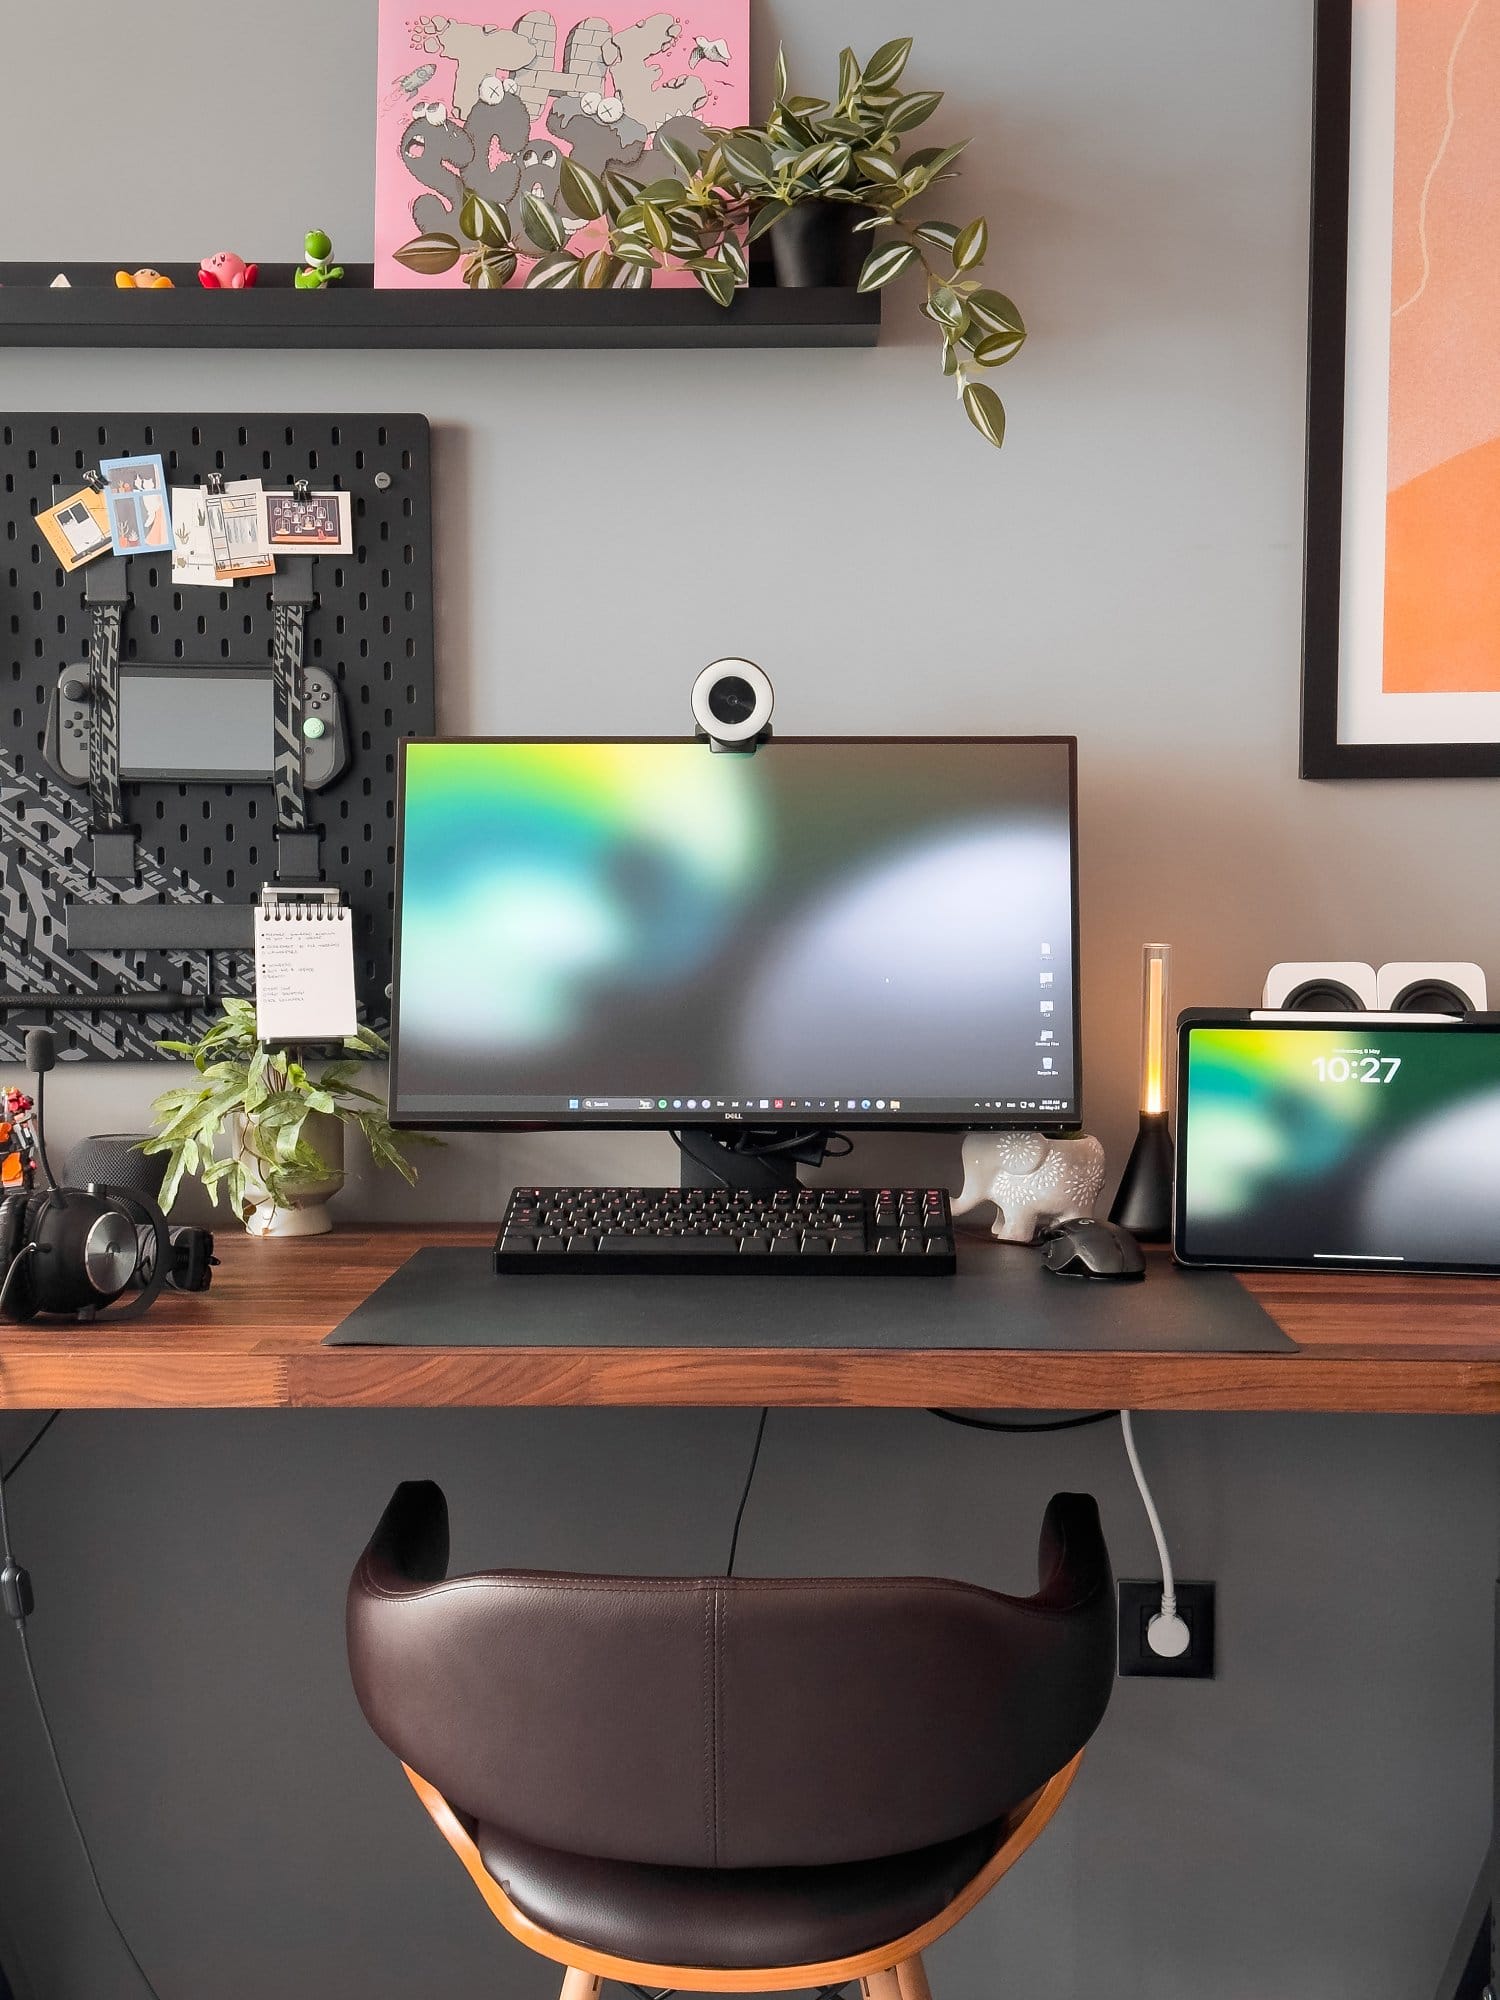 A neatly organised workspace with a Dell monitor and Razer Kiyo webcam, Logitech G Pro keyboard and mouse, an iPad Pro 12.9 (3rd Gen), Logitech G Pro X headphones, and a variety of plants and decorations, all set on a wooden IKEA KARLBY desk with IKEA ALEX drawers and an IKEA UPPSPEL pegboard in the background